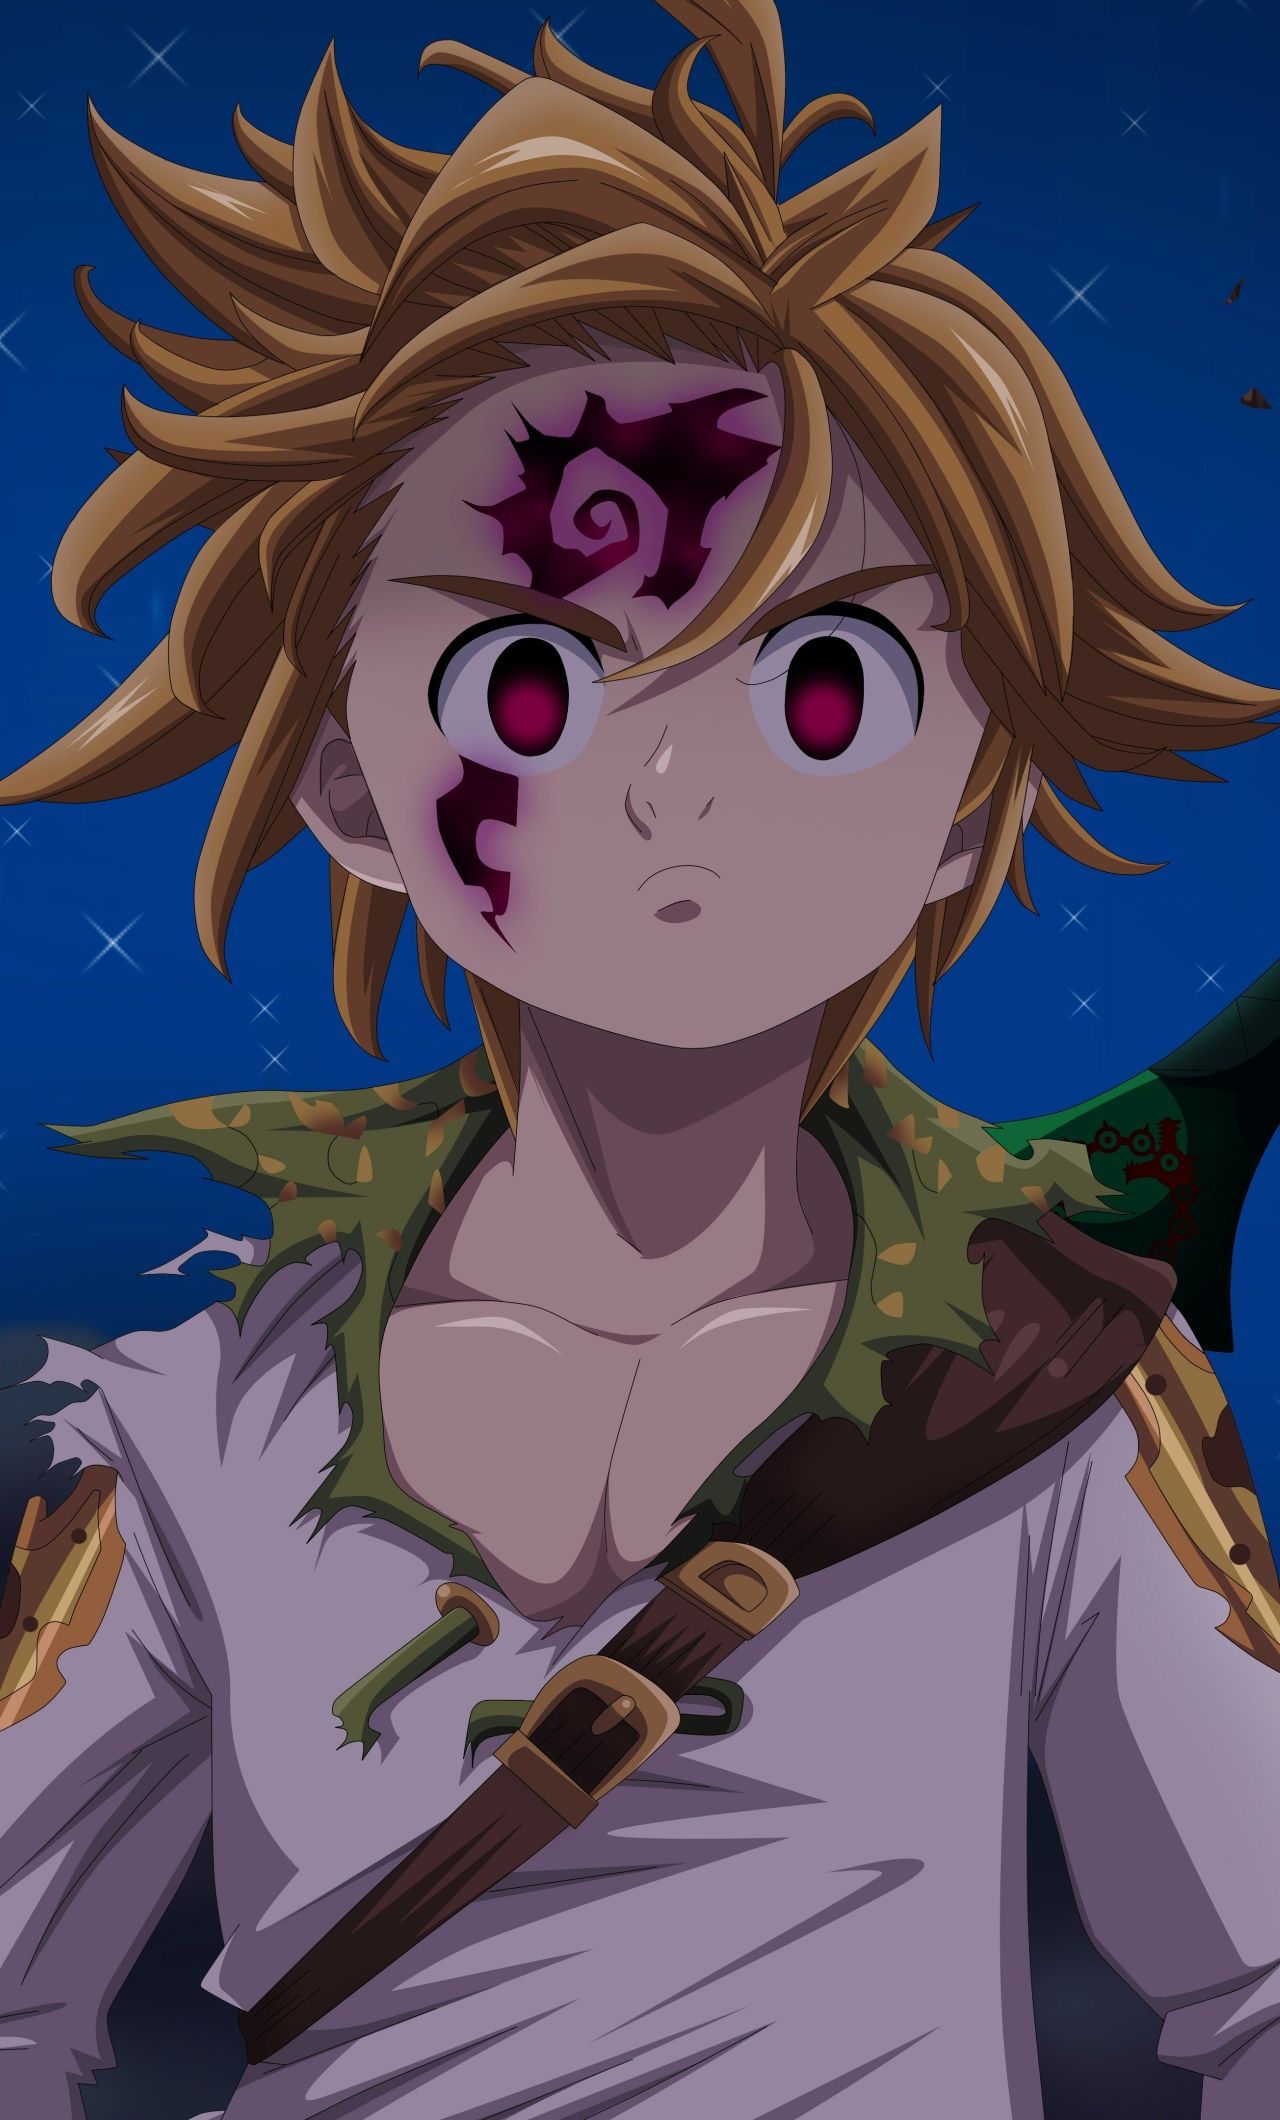 Meliodas From Demon The Seven Deadly Sins iPhone 6 plus Wallpaper, HD Anime 4K Wallpaper, Image, Photo and Background